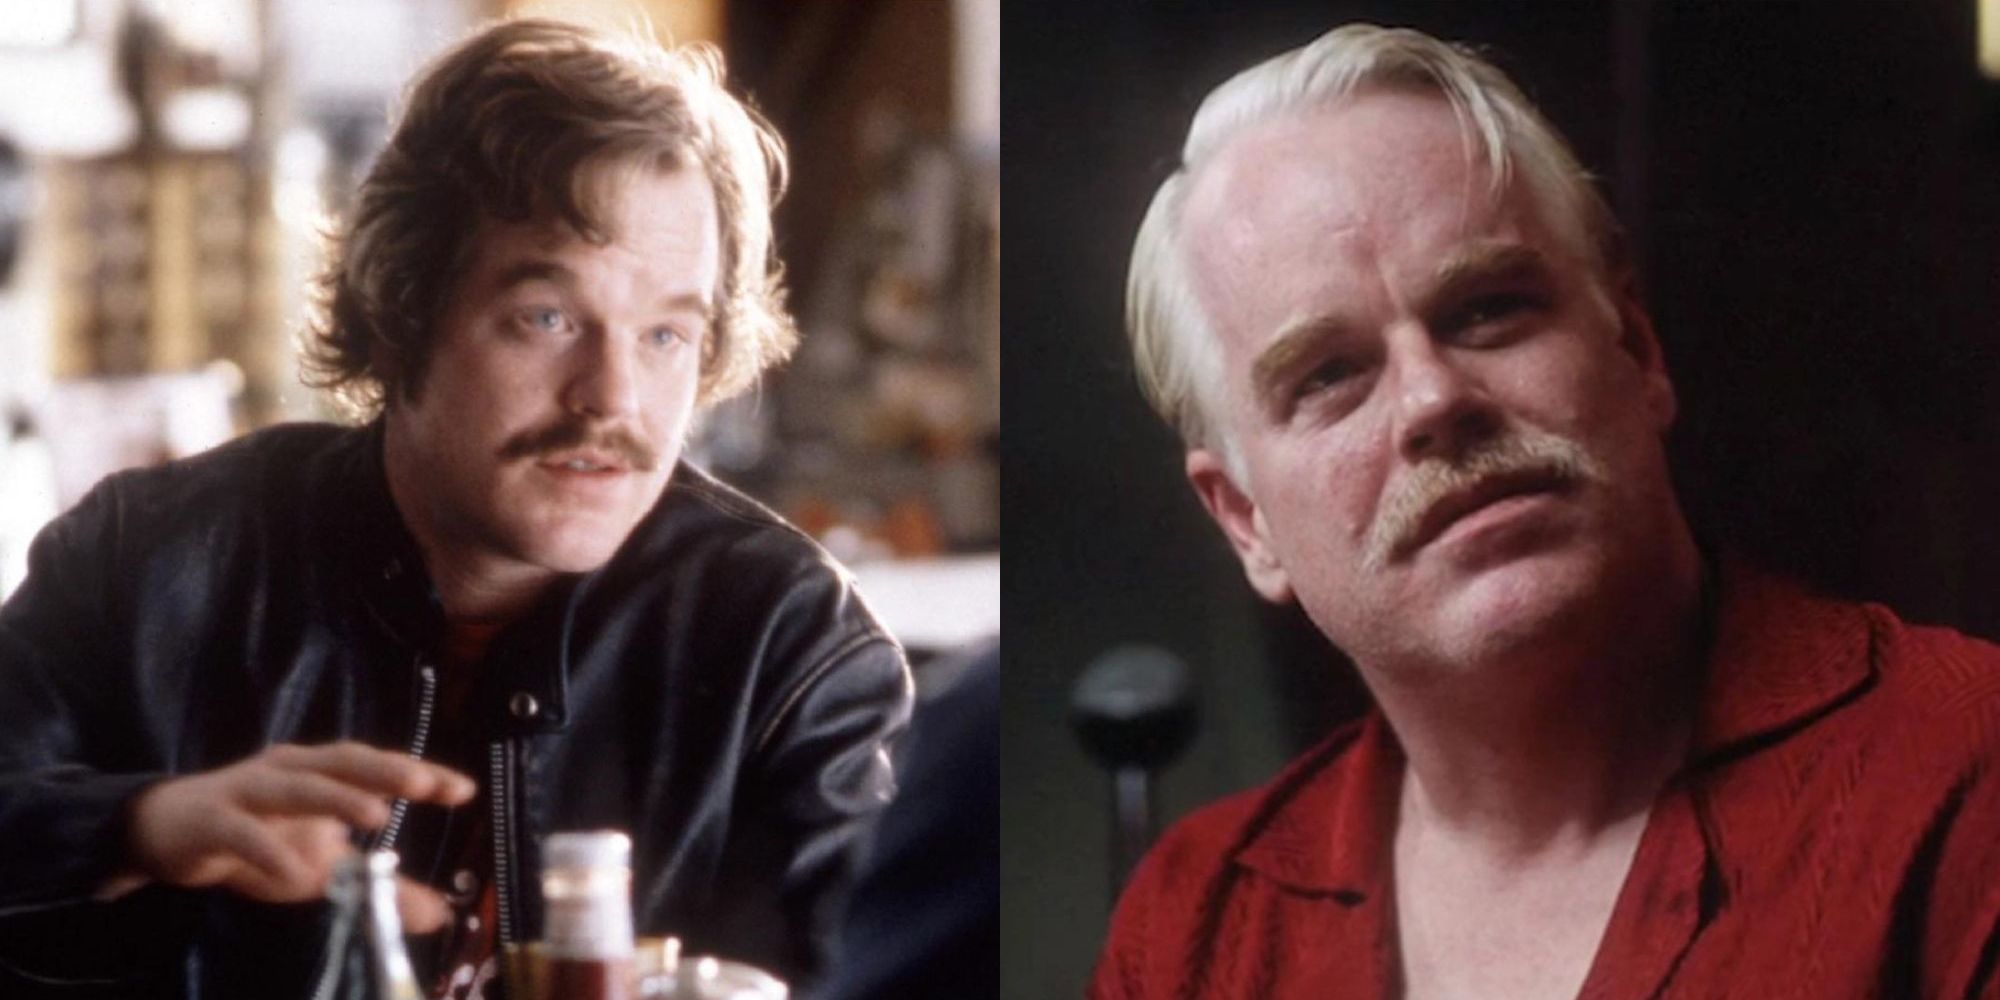 Philip Seymour Hoffman - Almost Famous & The Master